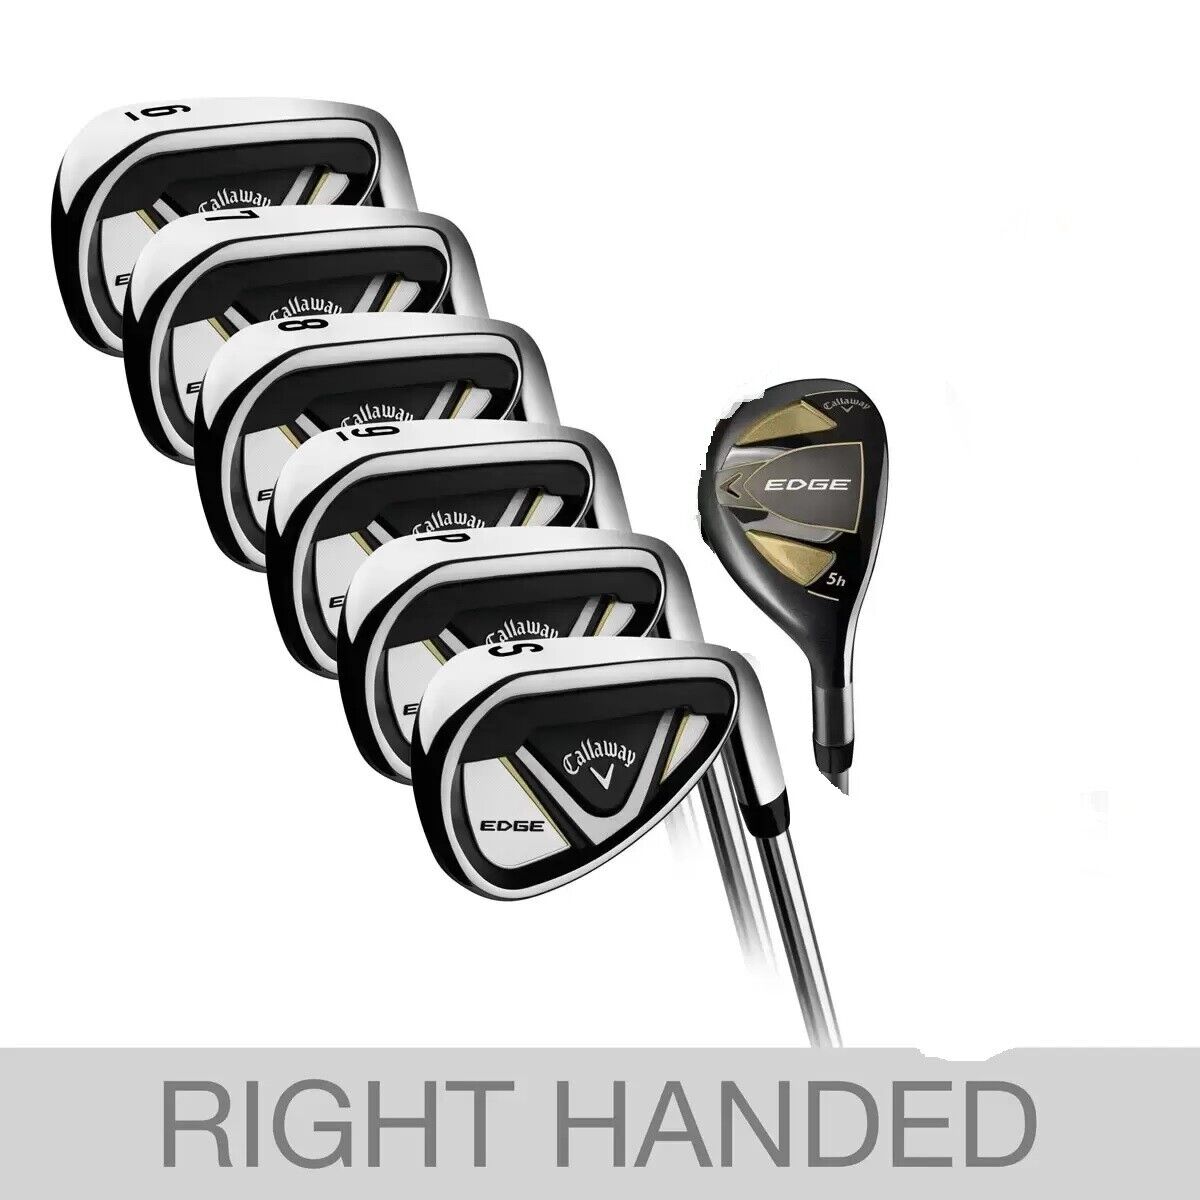 Callaway Edge mixed condition 7 Piece Steel Golf Set - Right Handed (set 4)